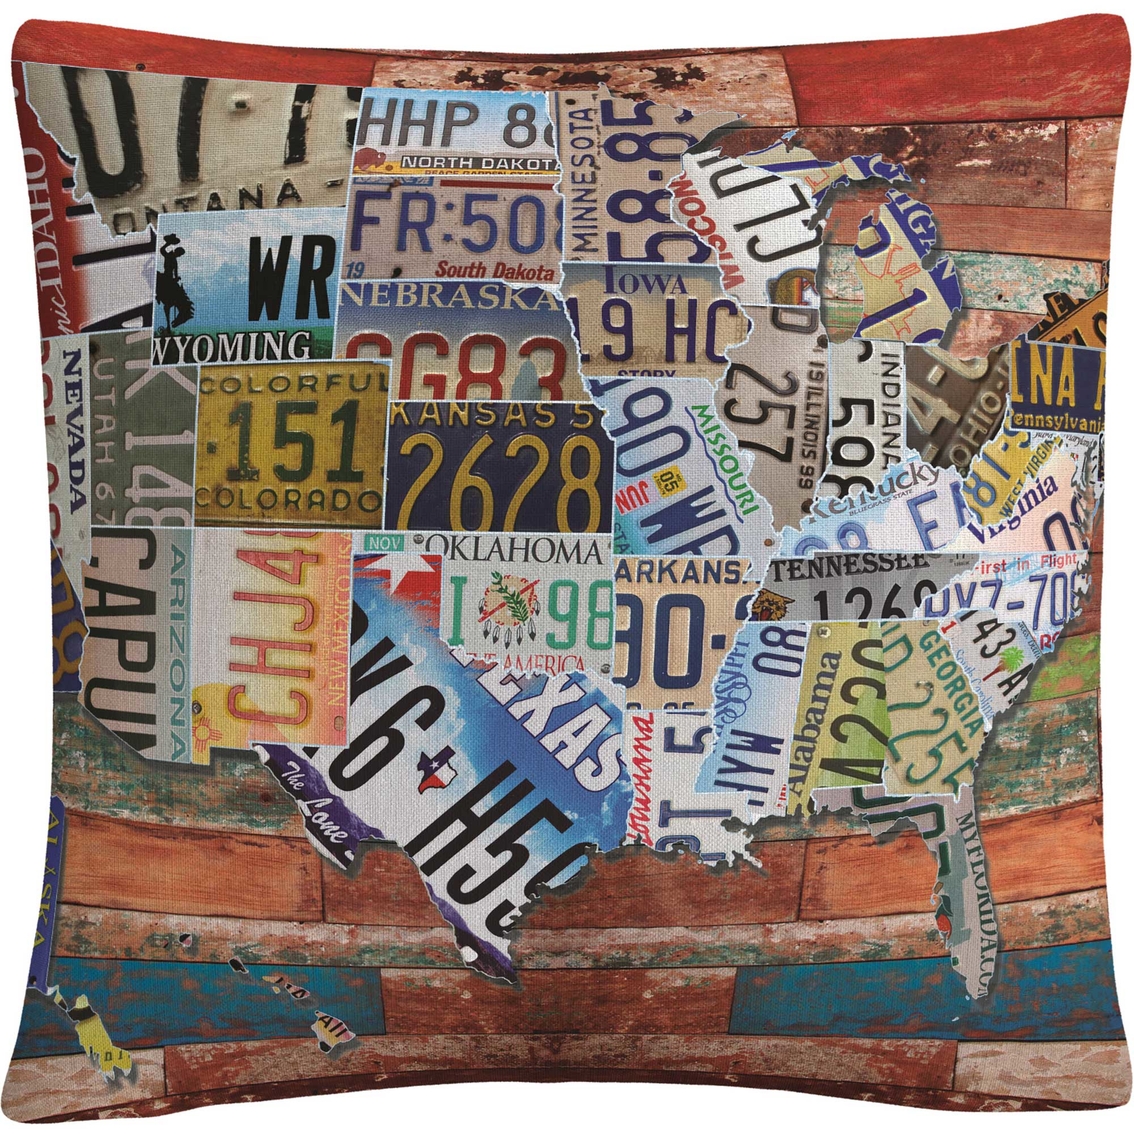 Trademark Fine Art USA License Plate on Wood Decorative Throw Pillow - Image 1 of 4